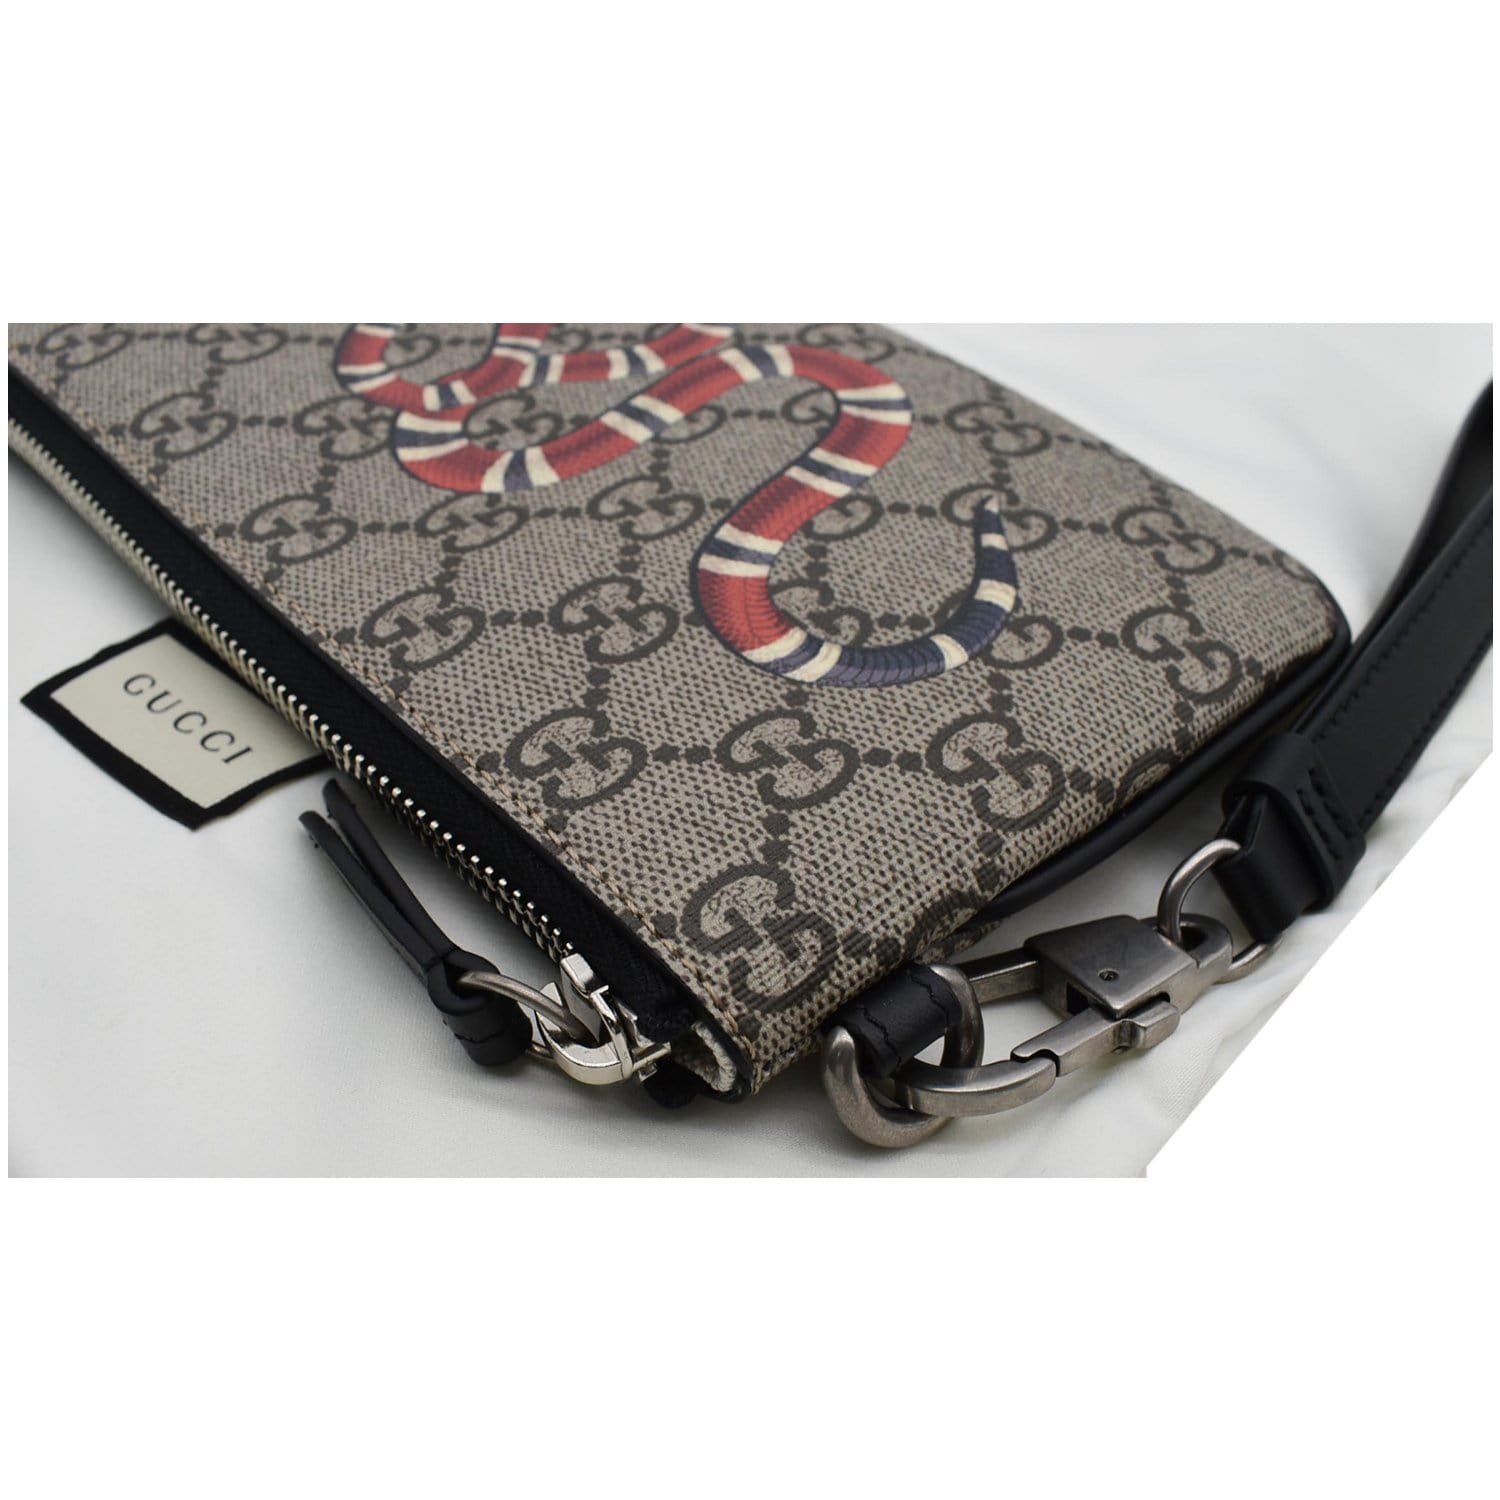 Kingsnake' chiselled metal tray, large by Gucci